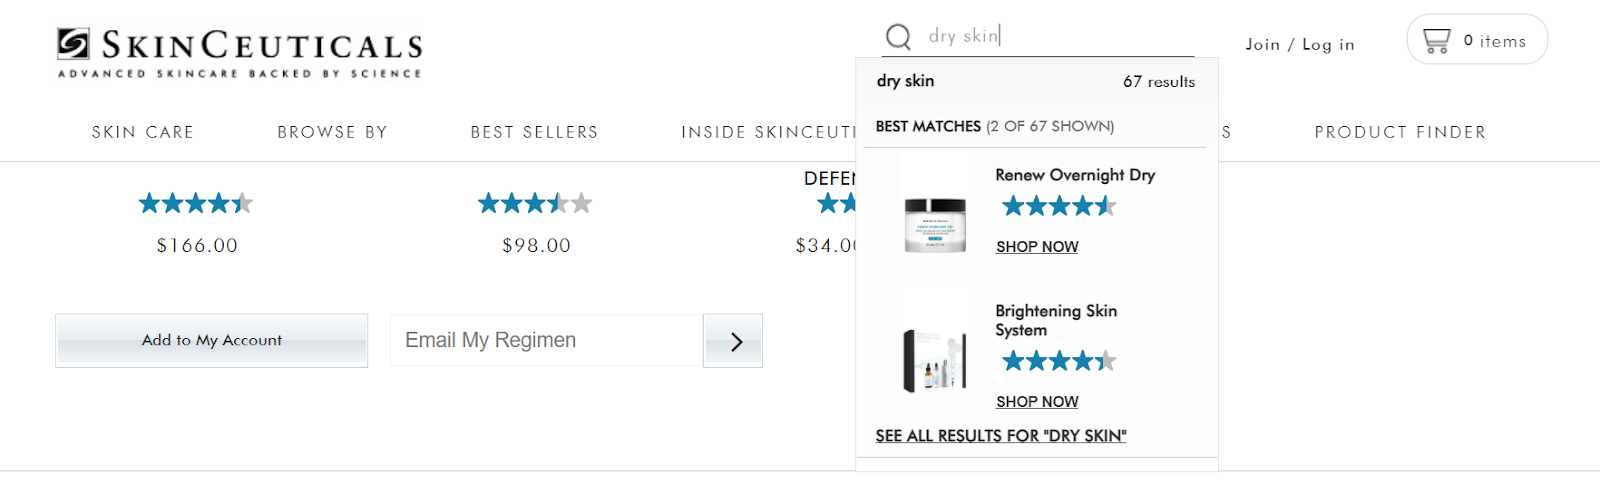 beauty-ecommerce-marketing-onsite-search-skinceuticals2